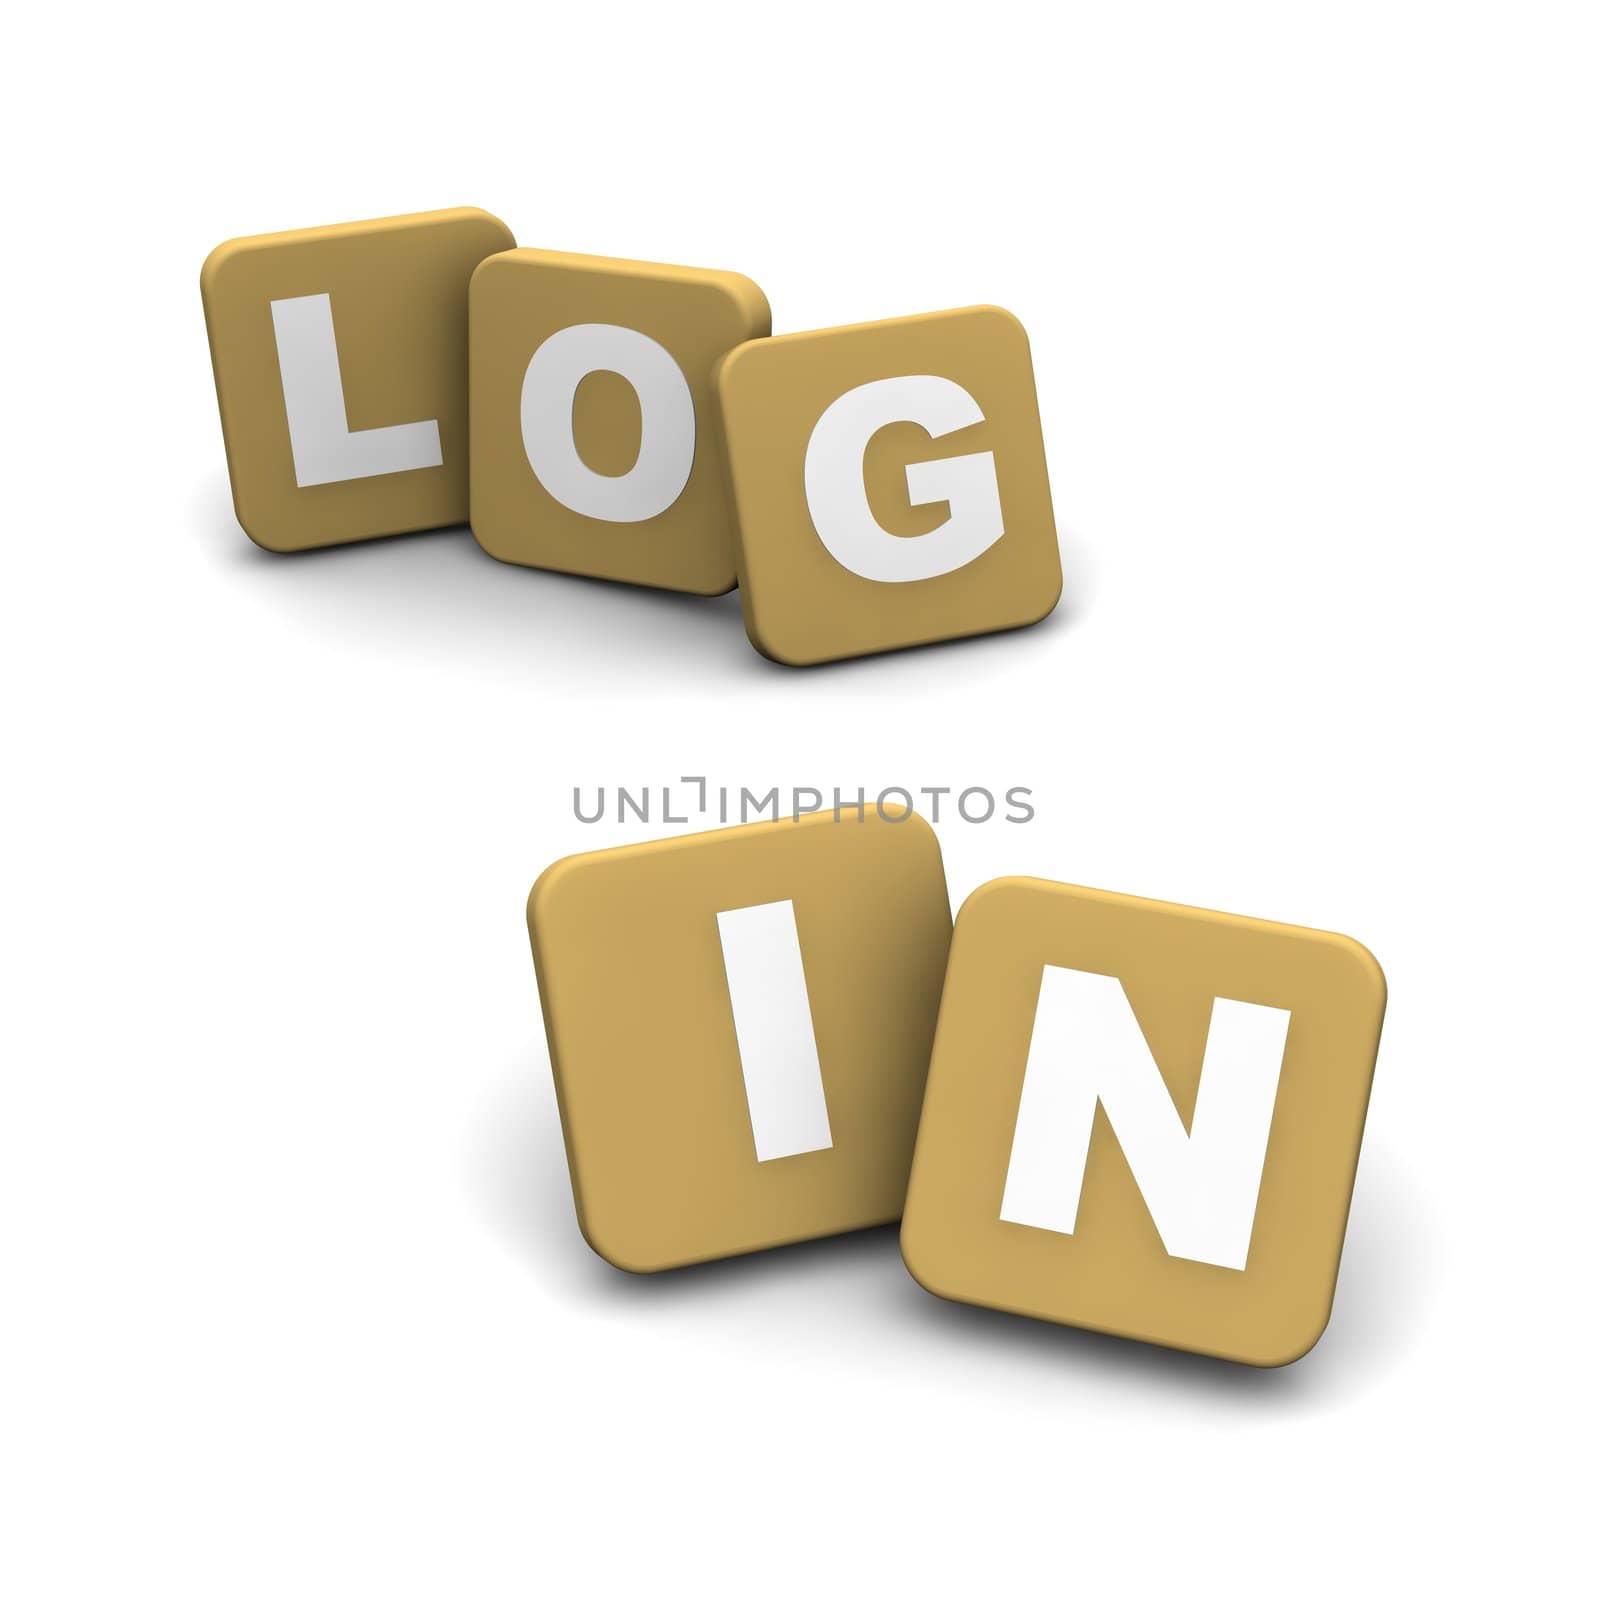 Log in text. 3d rendered illustration isolated on white.